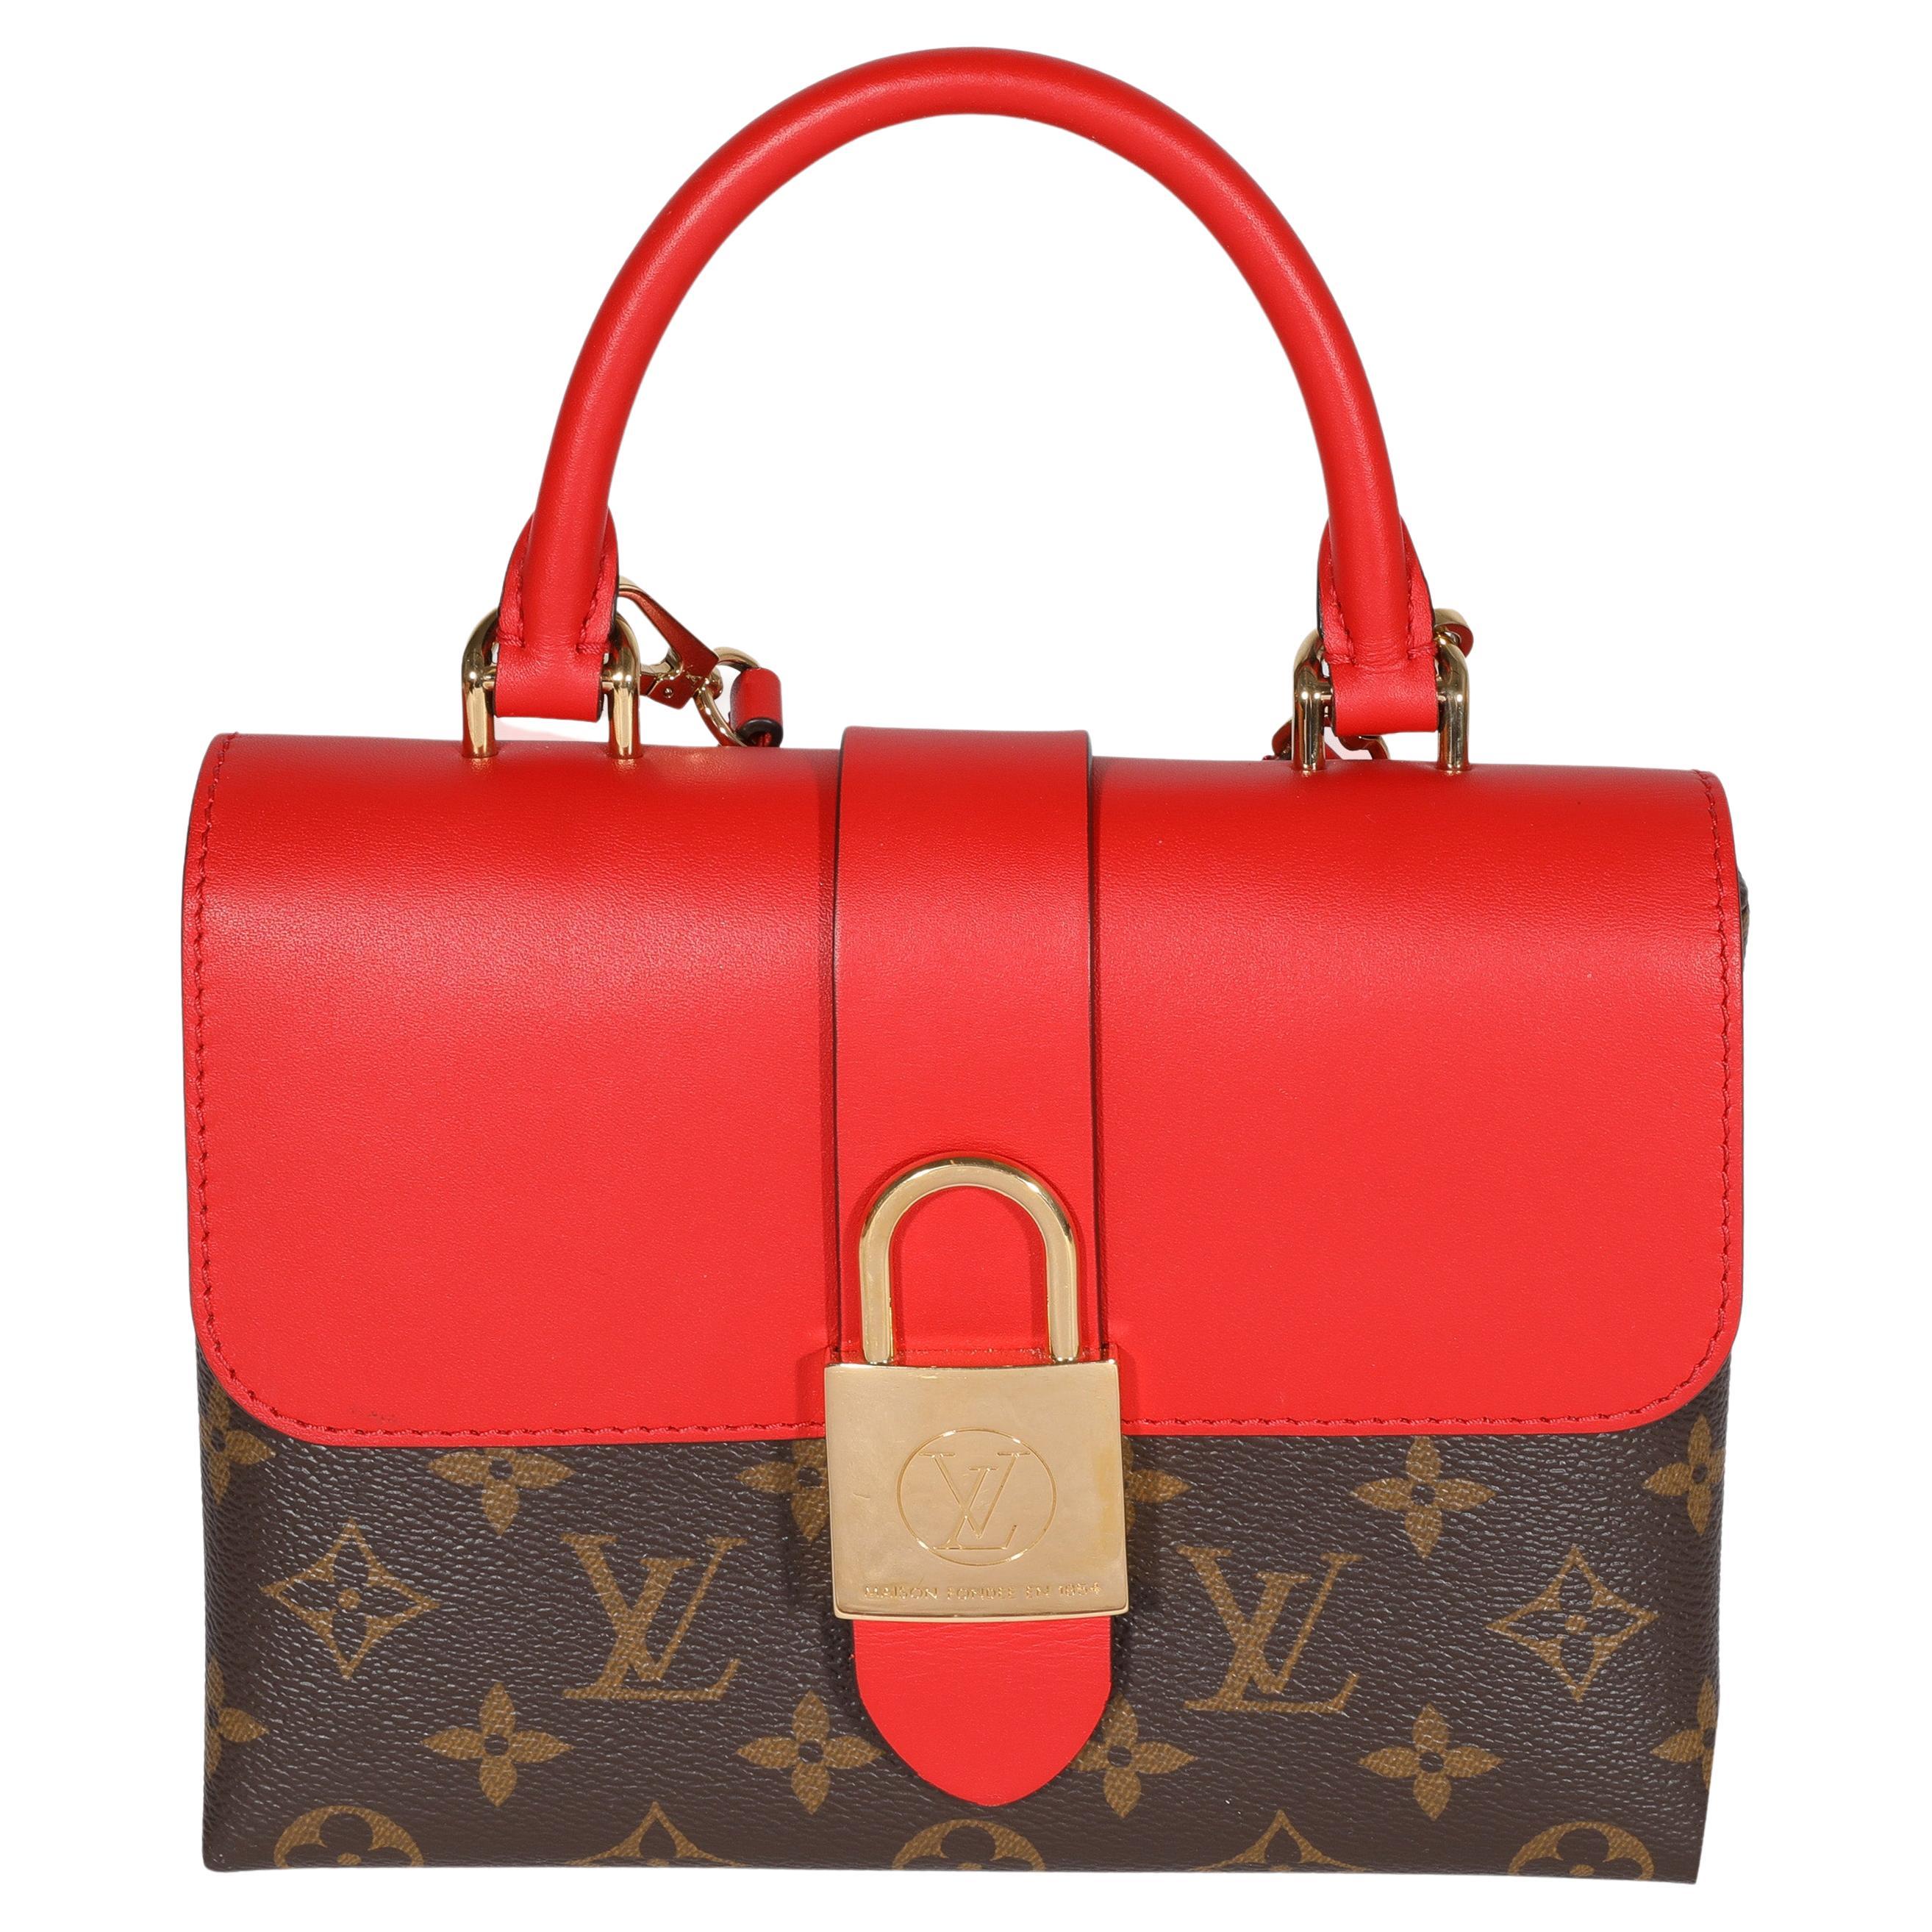 Vintage Louis Vuitton Handbags and Purses - 11,650 For Sale at 